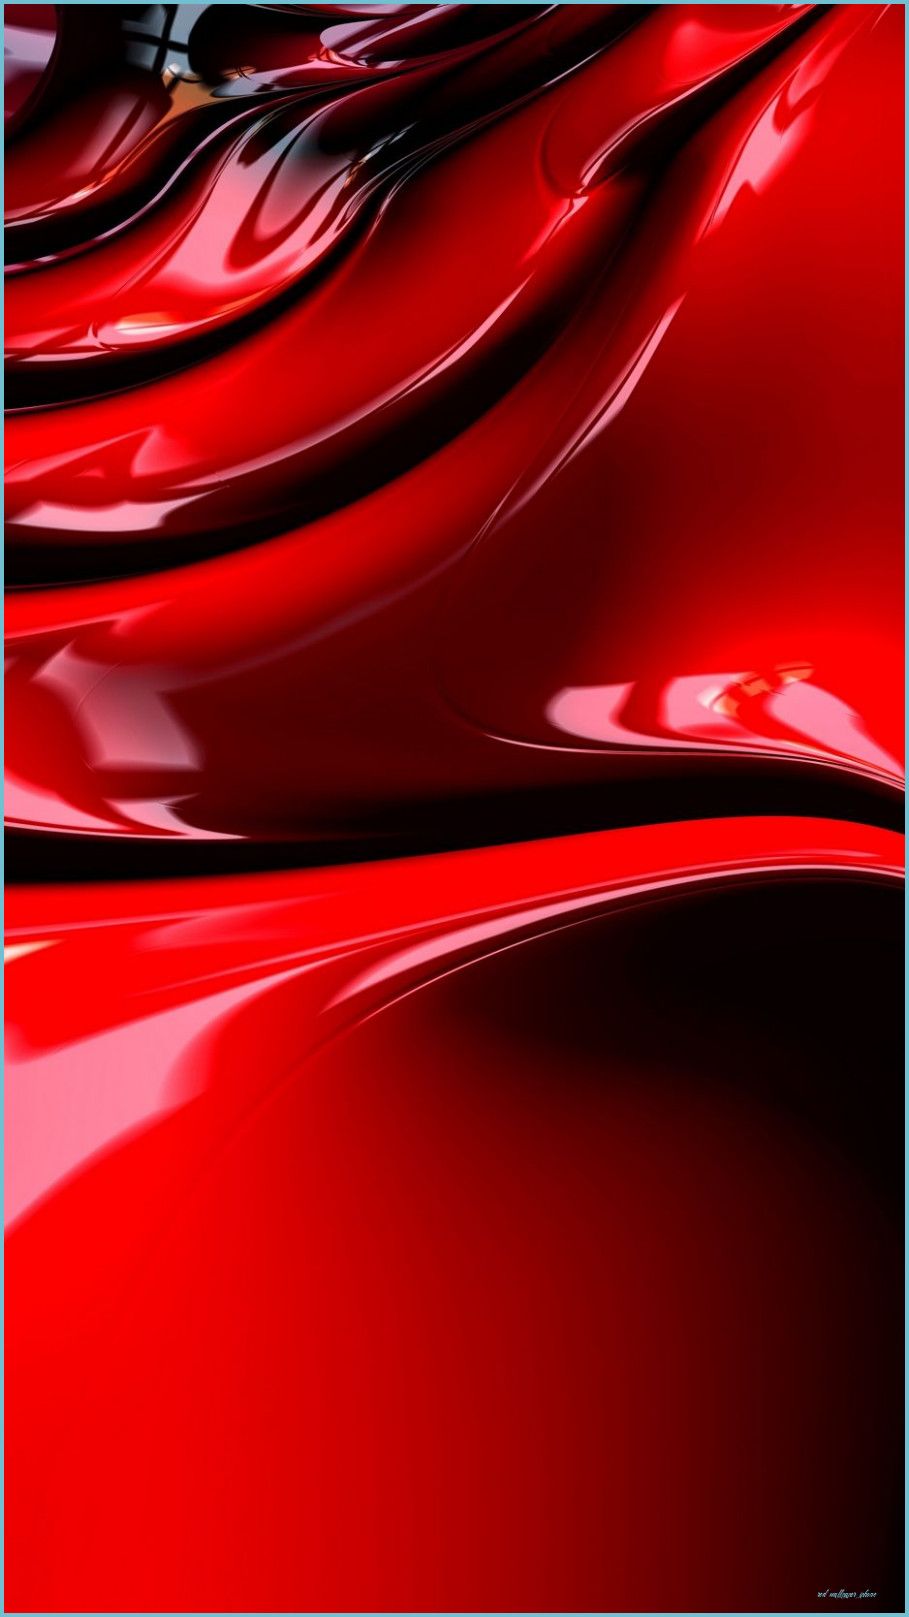 IPhone 12 Red Wallpaper Free IPhone 12 Red Background Wallpaper iPhone